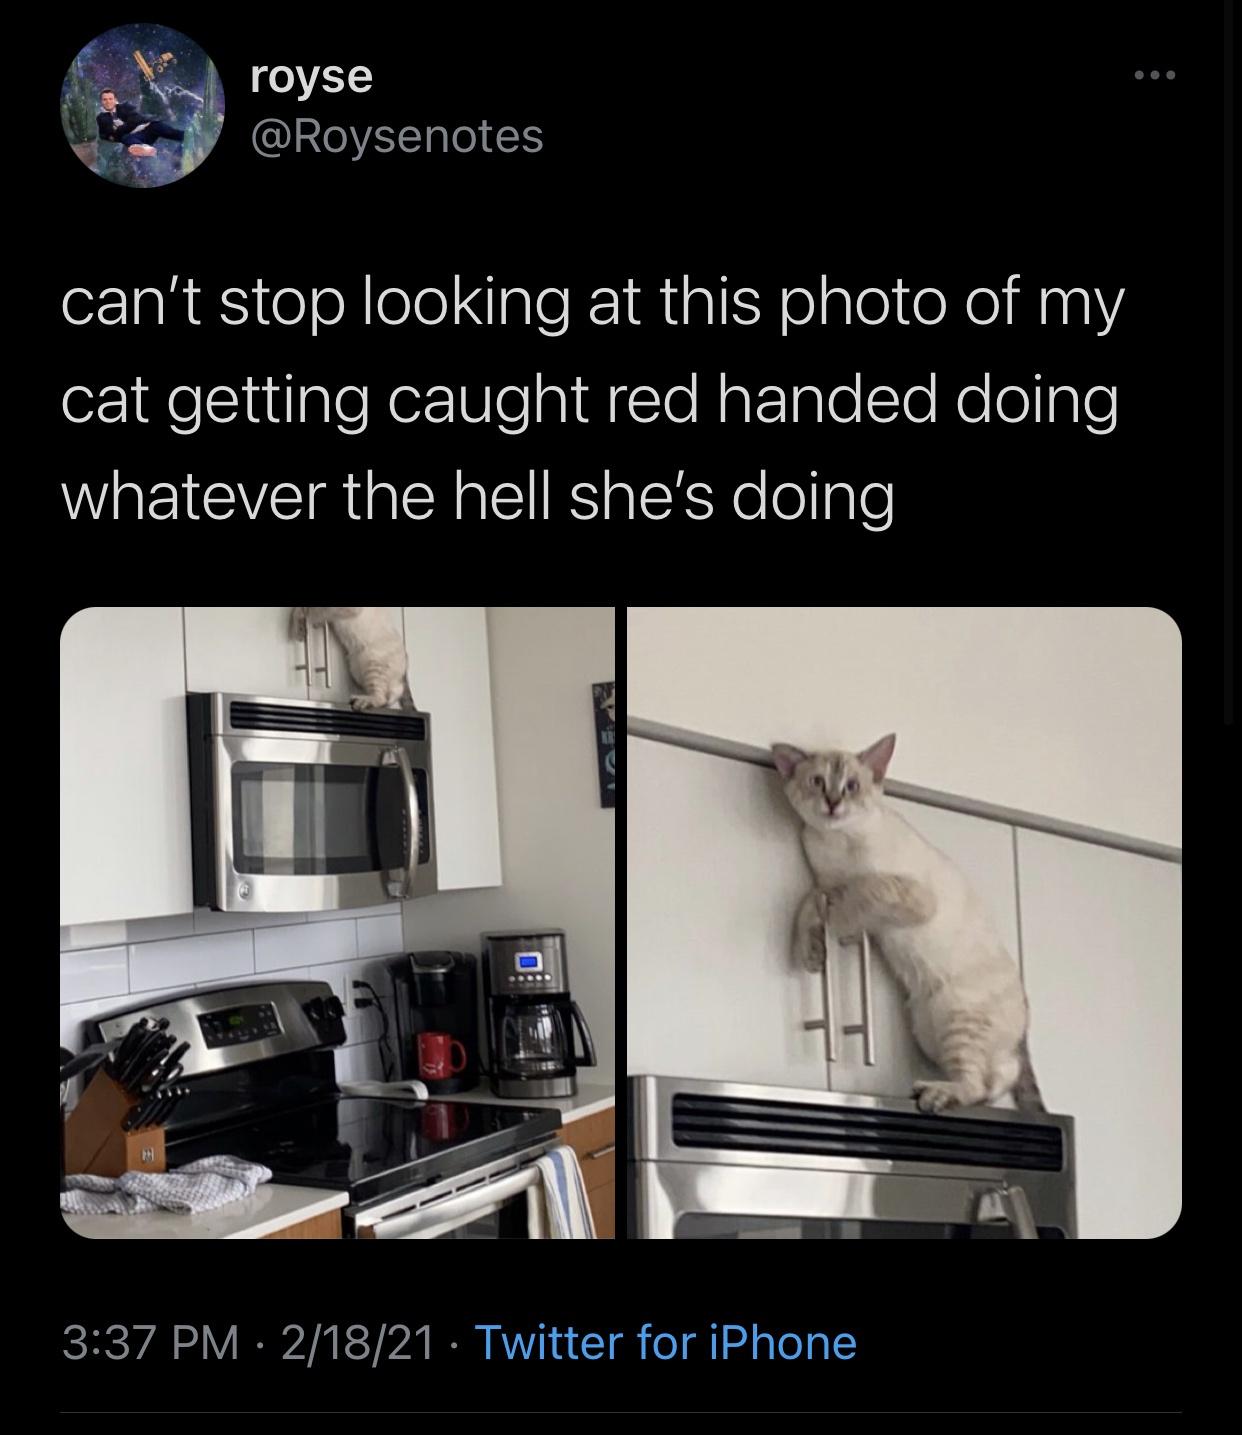 photo caption - royse can't stop looking at this photo of my cat getting caught red handed doing whatever the hell she's doing 21821 Twitter for iPhone